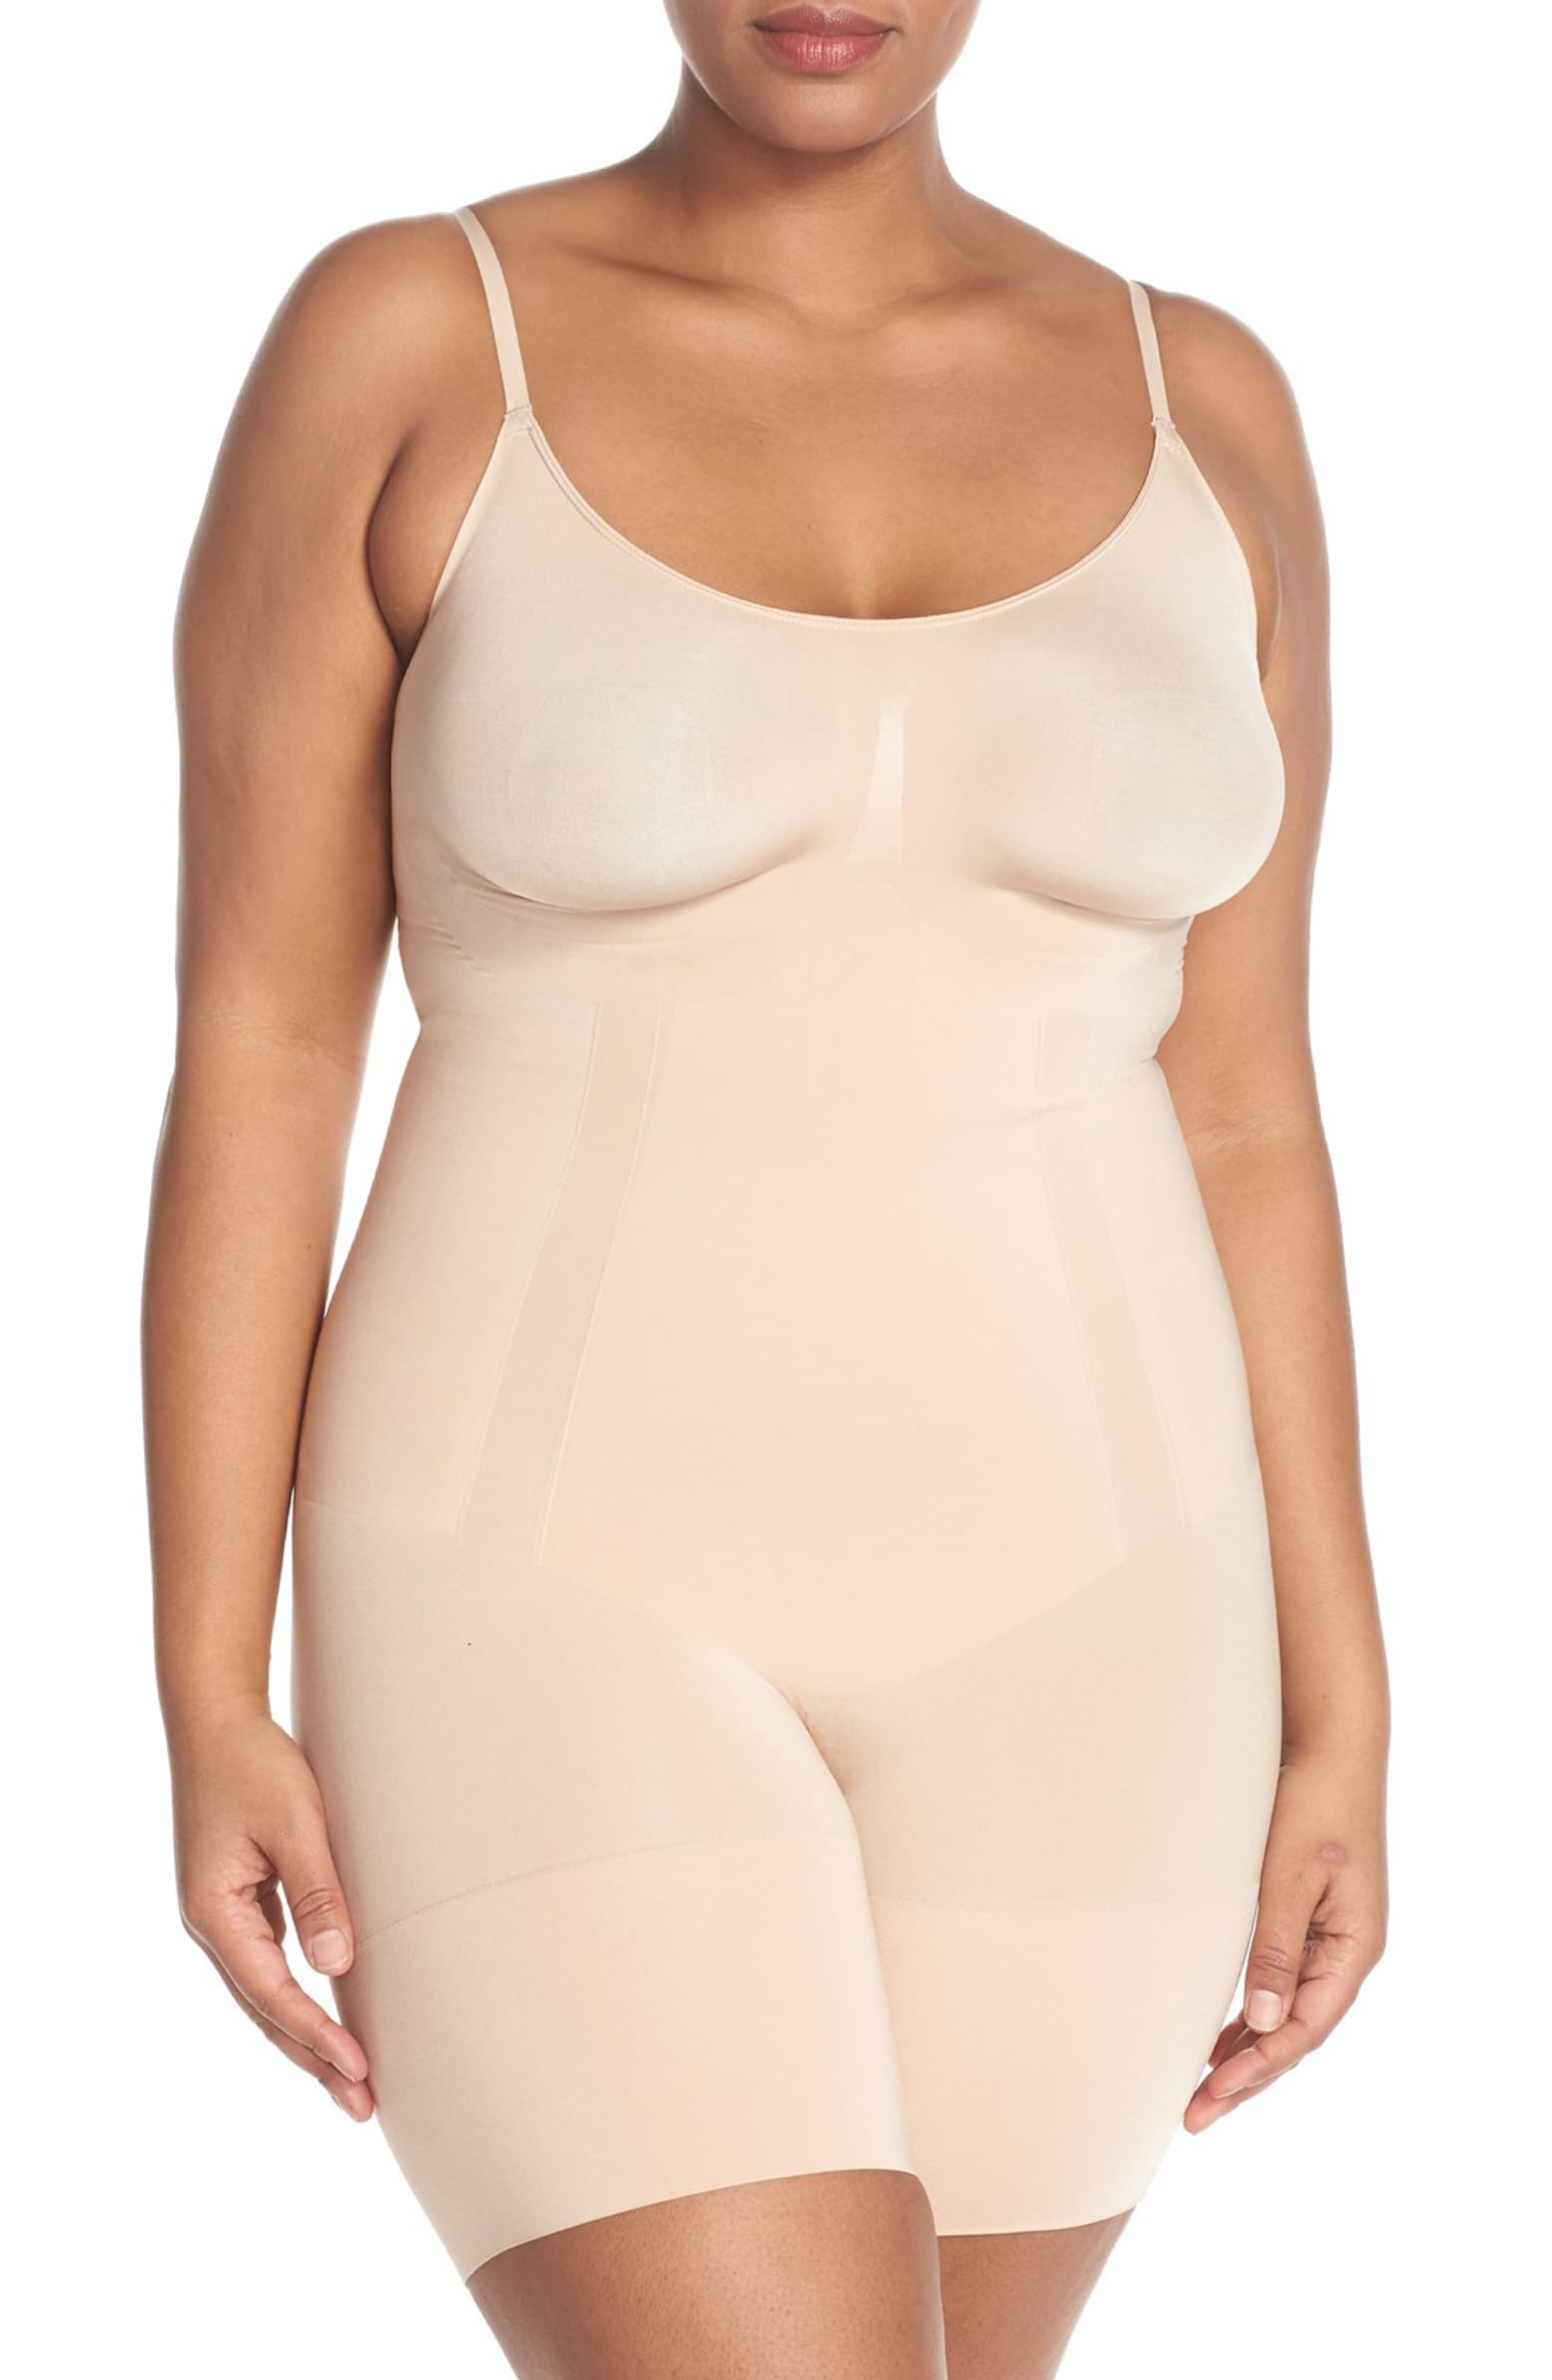 The Highly Rated Shapewear You Need to Smooth It All Out